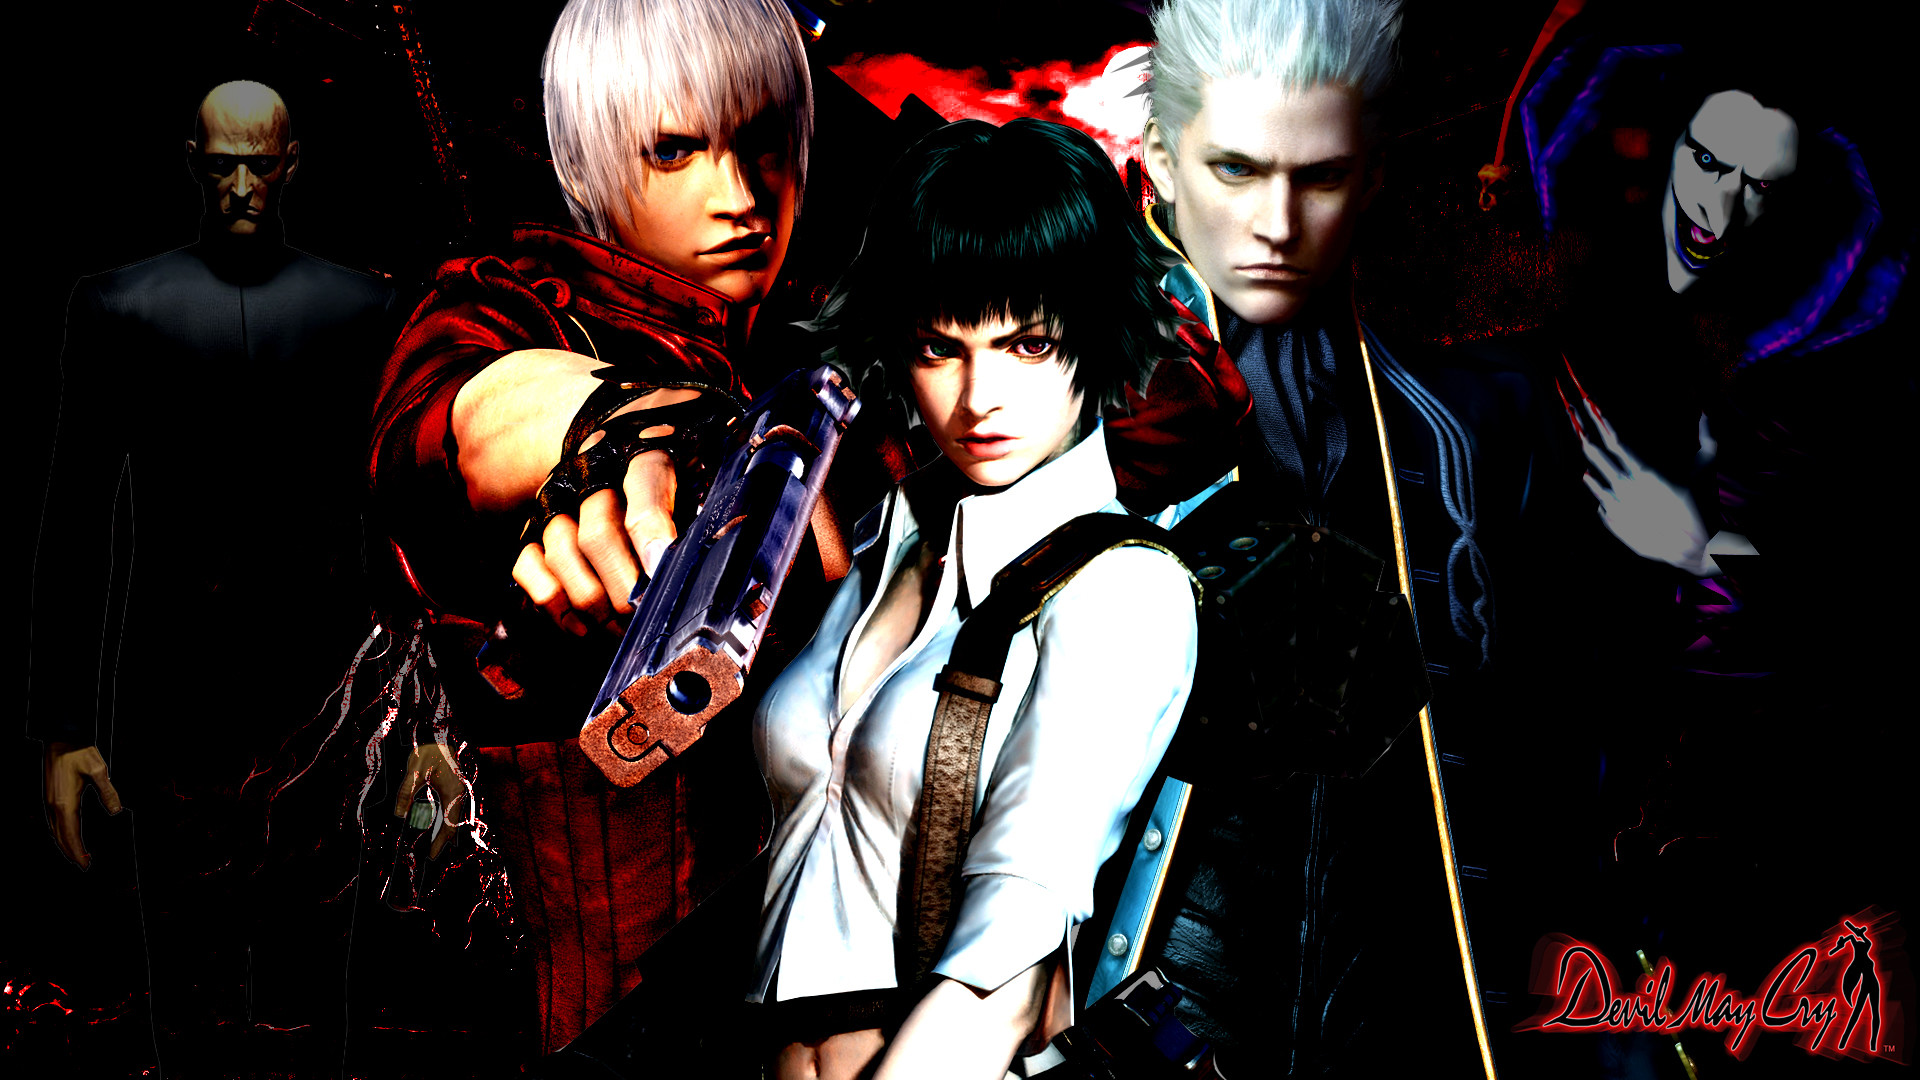 1920x1080 Devil May Cry Wallpaper by MightyHamster Devil May Cry Wallpaper by  MightyHamster